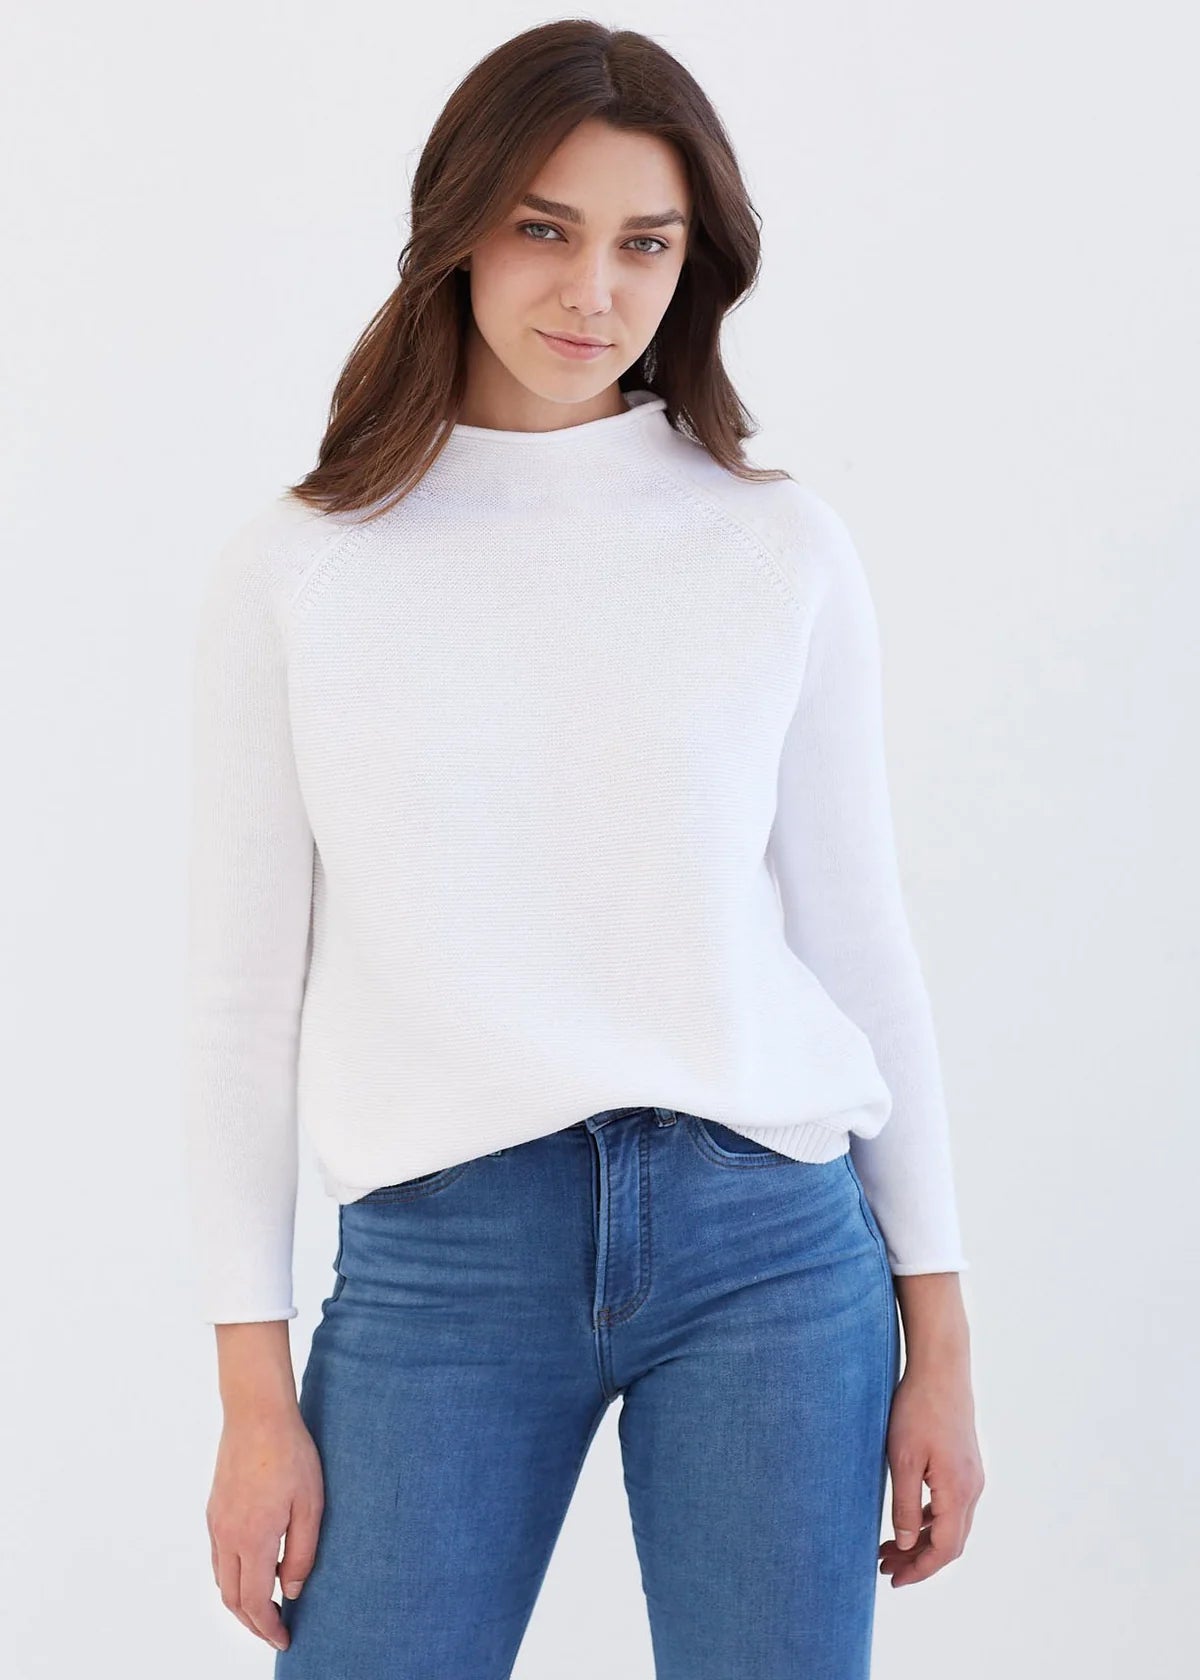 The cotton version of our best-selling cashmere sweater has arrived and we guarantee you'll love it just as much. This mock neck style sweater is just as stylish as it is comfortable - knitted out of a luxe Peruvian cotton that is super soft and perfect for all seasons. Delicate details like the rolled finish at the neck and sleeves will make this your go-to “elevated casual” knit that you reach for over and over again.   Fit Note: Runs true to size, but if you're in between sizes, we recommend sizing up.